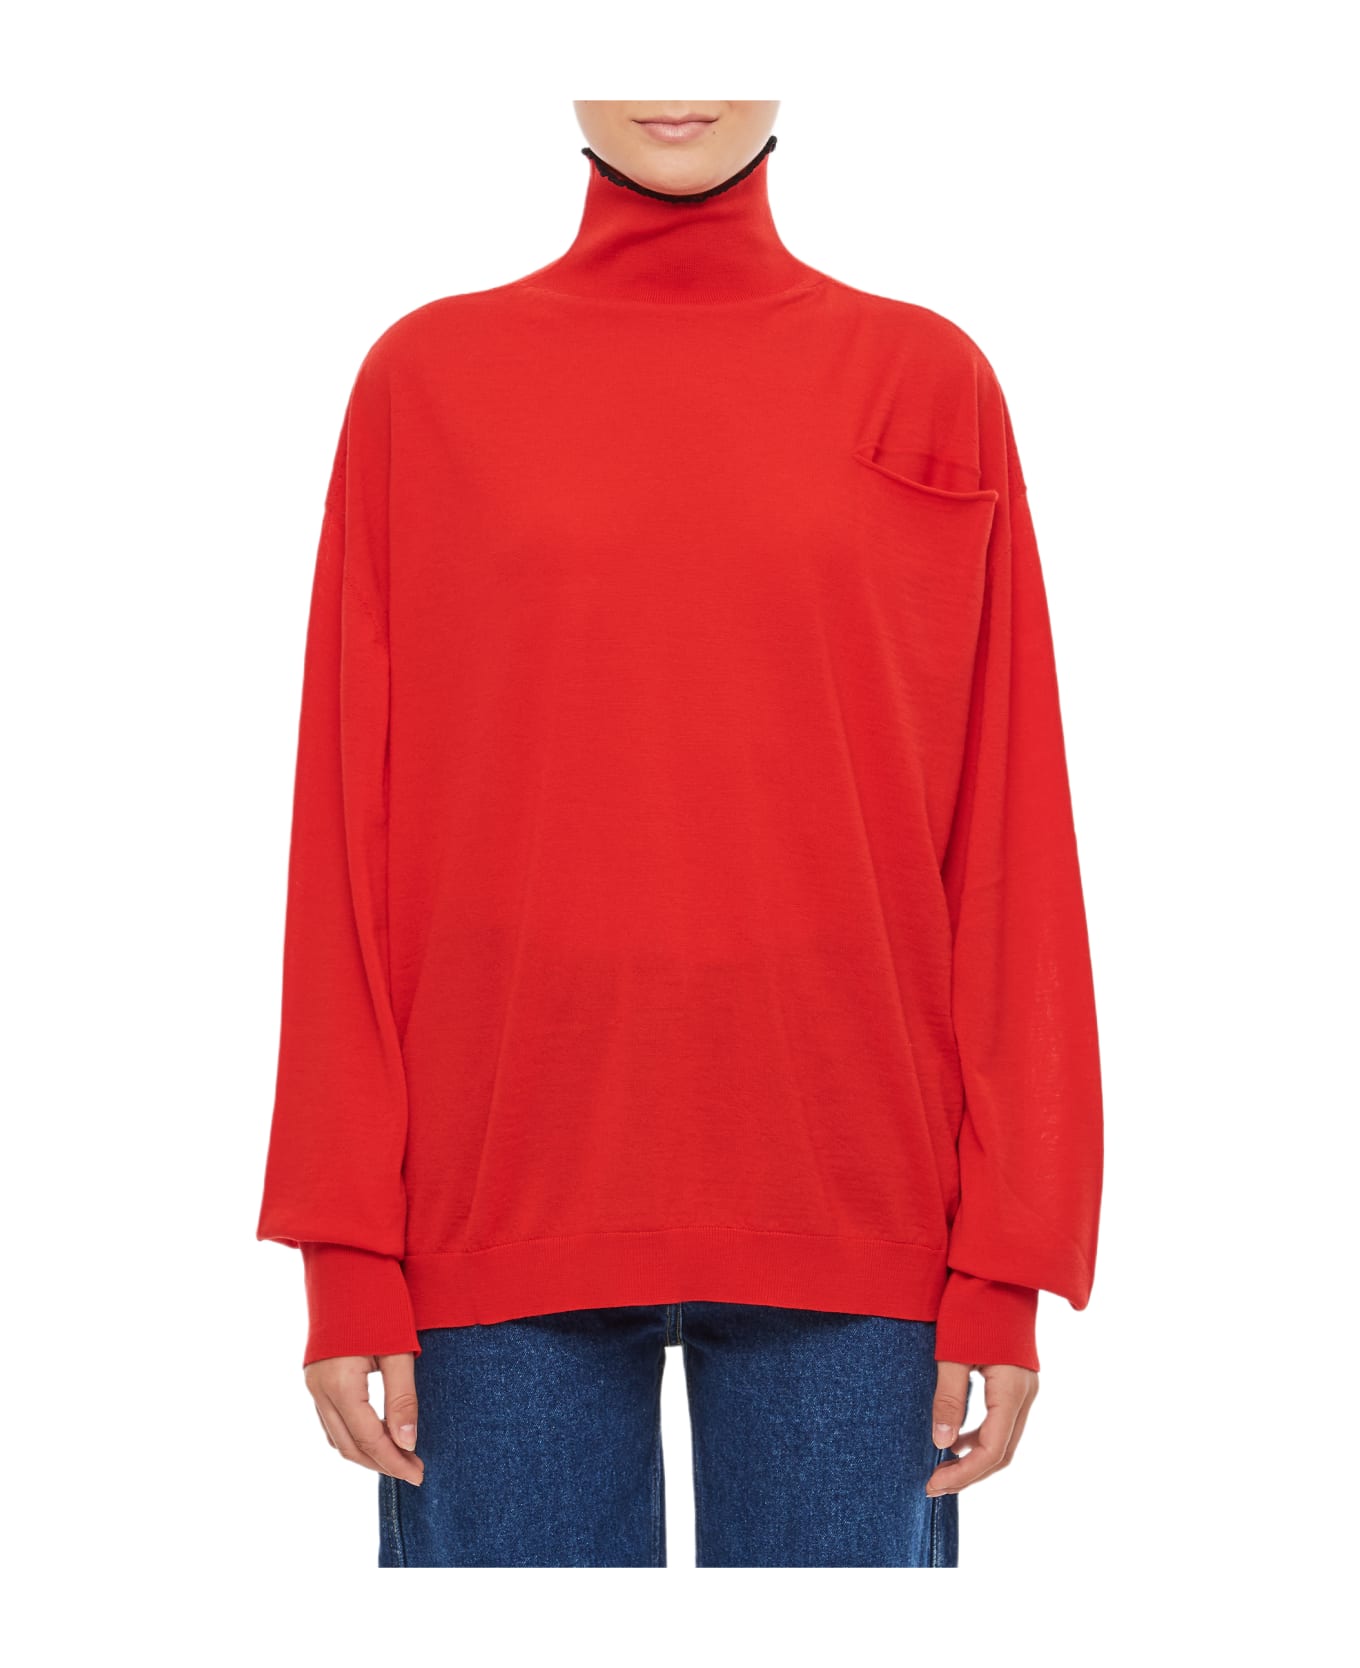 Quira Rollneck Wool Sweater - Red